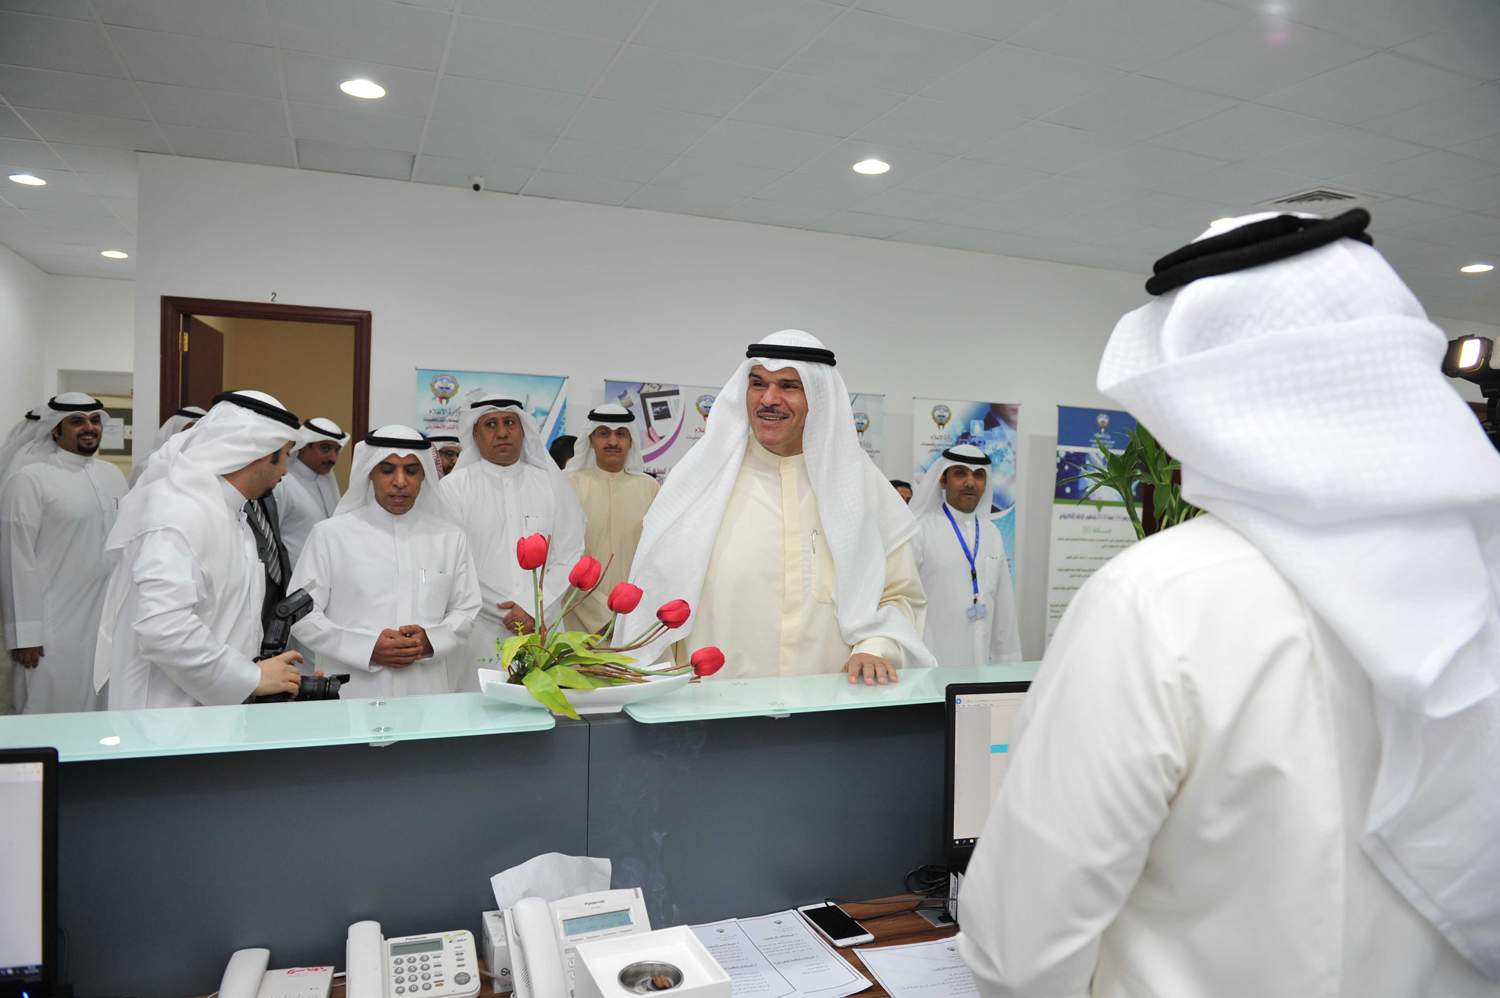 Kuwaiti Minister of Information and Minister of State for Youth Affairs Sheikh Salman Sabah Al-Salem Al-Homoud Al-Sabah during a tour to the electronic publishing department at the ministry